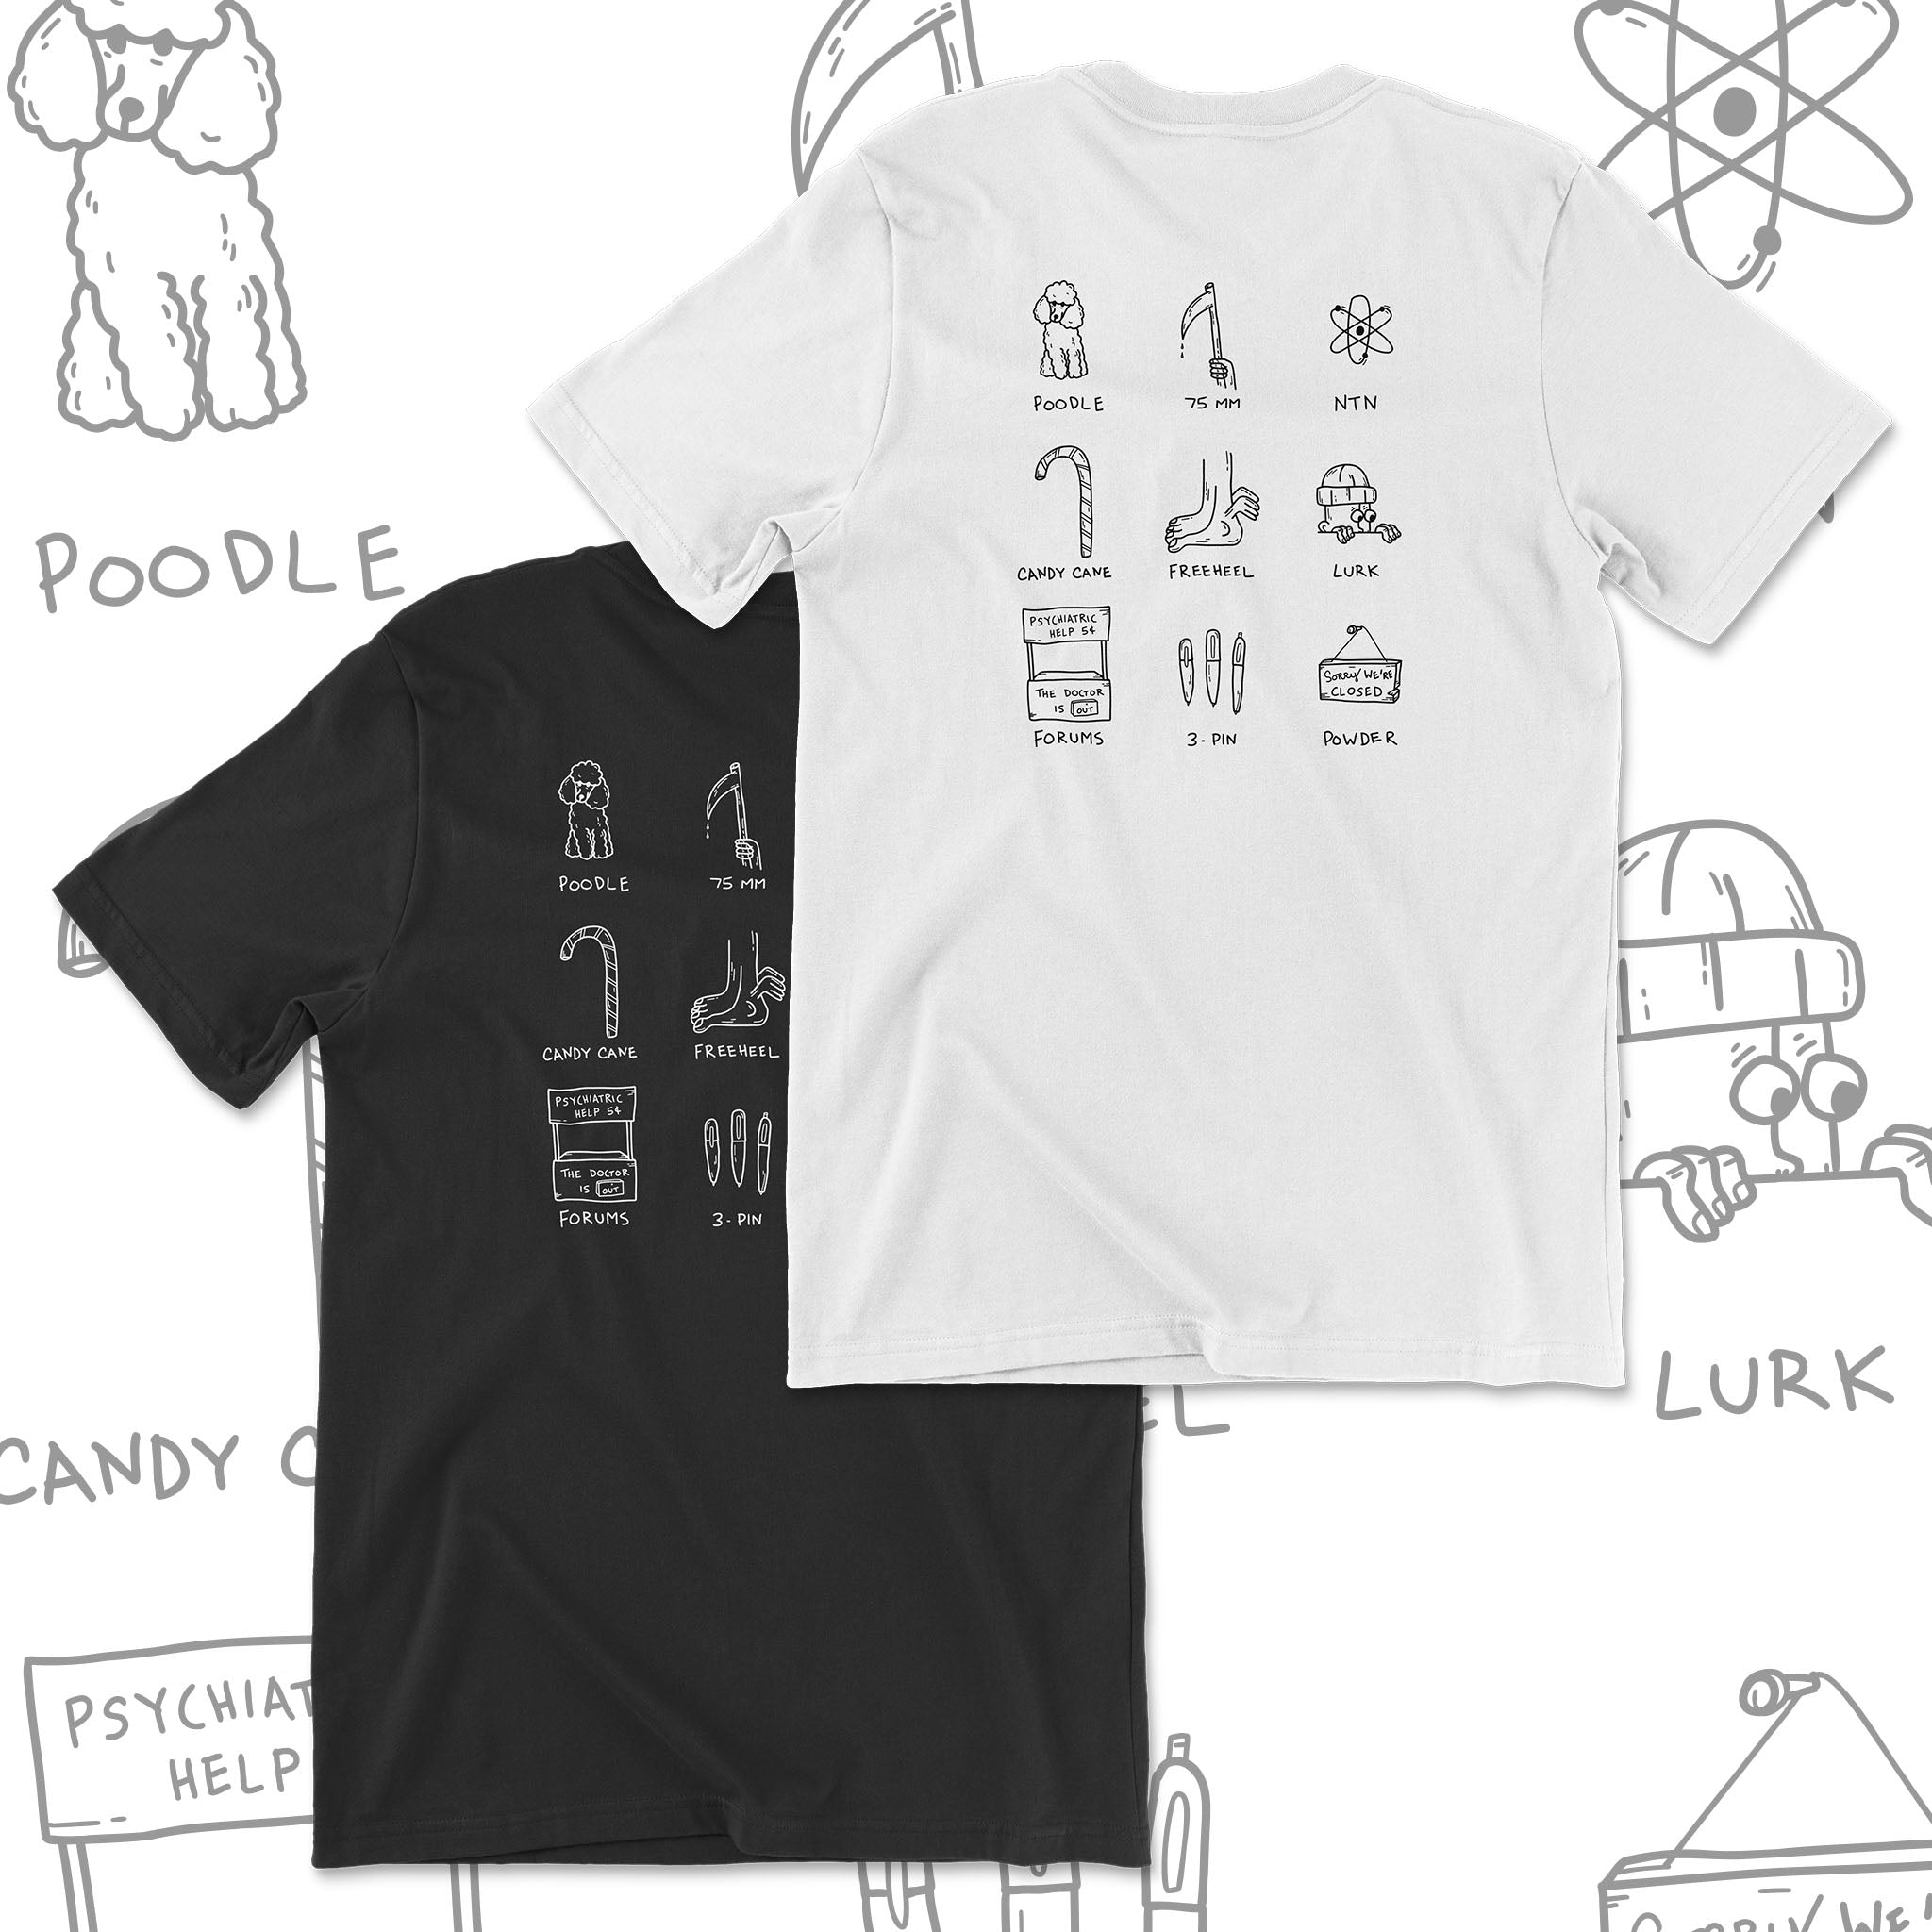 "(Tele Terms) Pictionary" Tee